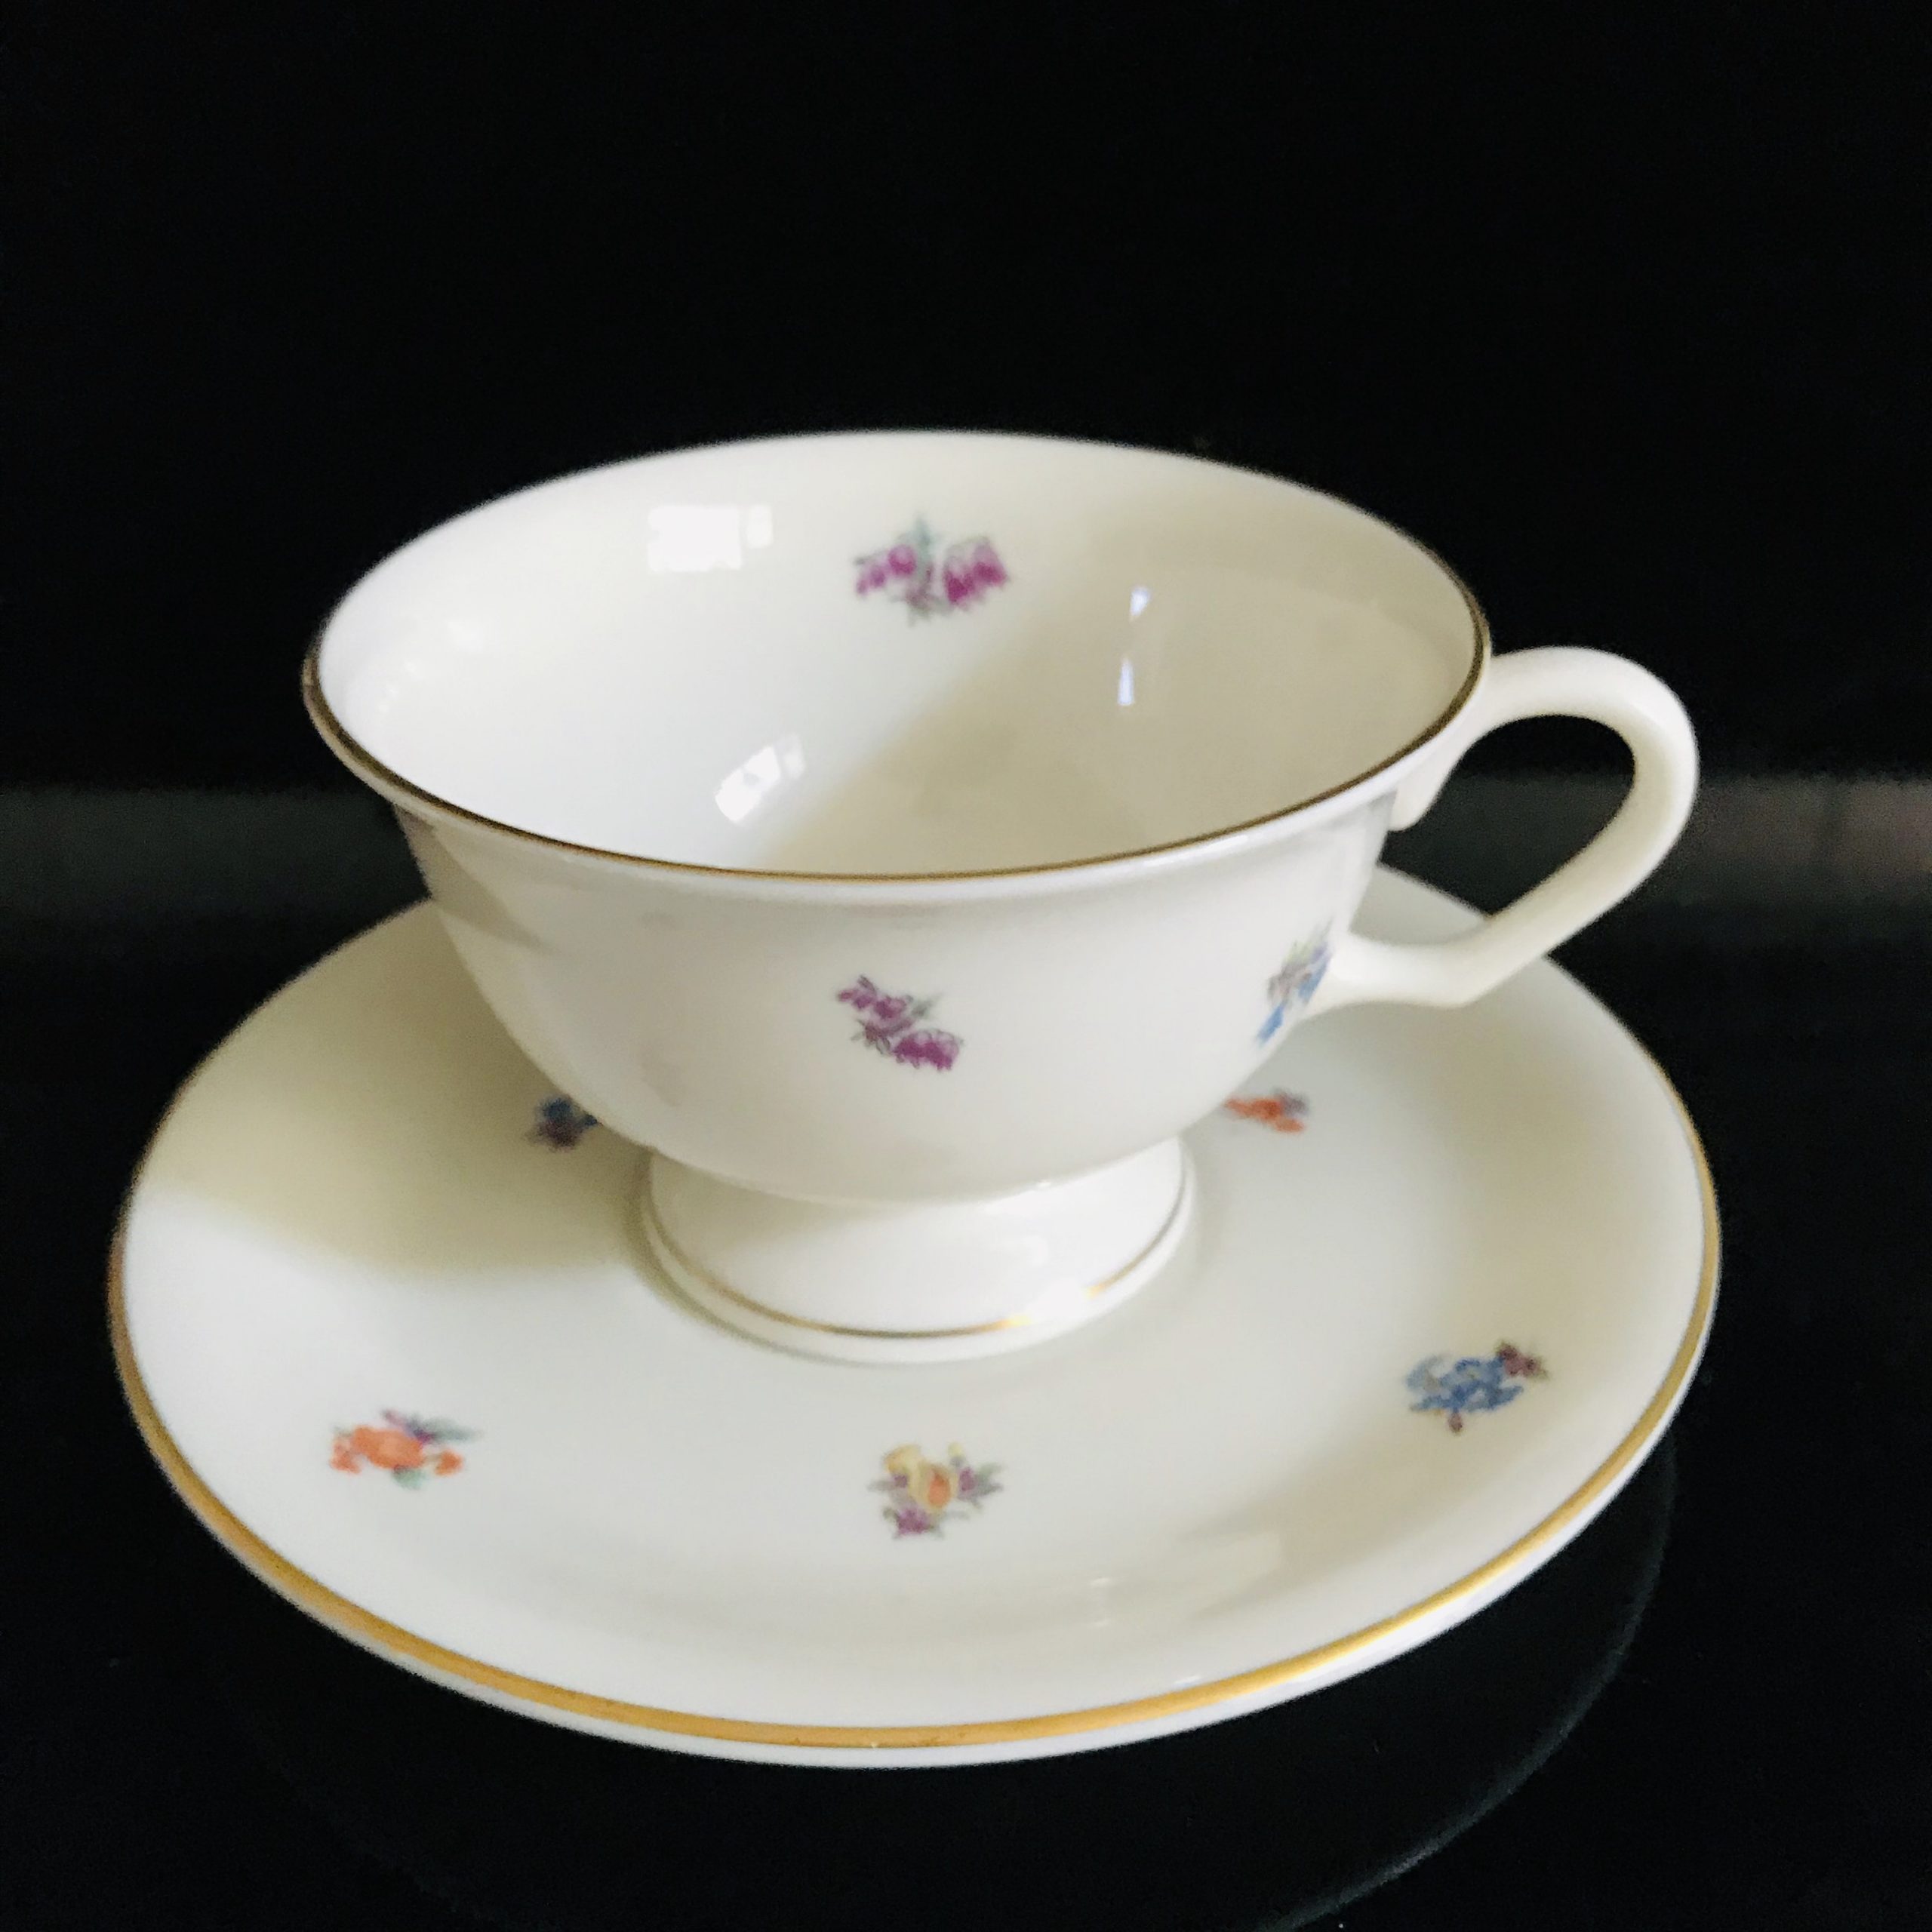 Stunning Imperial Tea Trio Black and 22KT Gold Chintz Pink 